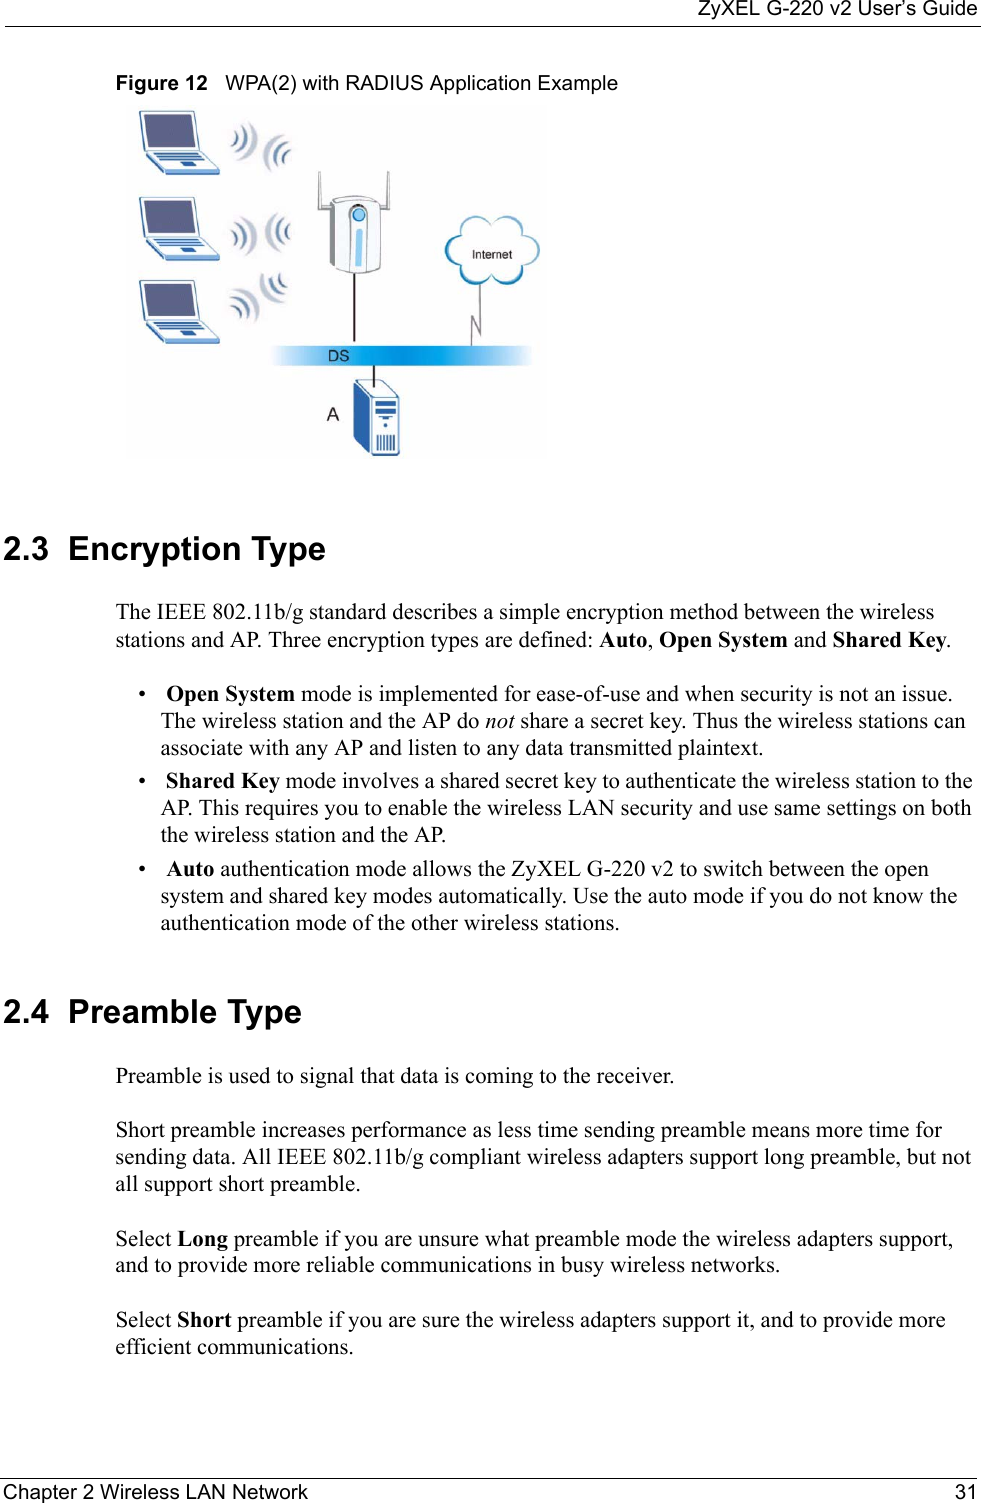 ZyXEL G-220 v2 User’s GuideChapter 2 Wireless LAN Network 31Figure 12   WPA(2) with RADIUS Application Example2.3  Encryption Type The IEEE 802.11b/g standard describes a simple encryption method between the wireless stations and AP. Three encryption types are defined: Auto, Open System and Shared Key.• Open System mode is implemented for ease-of-use and when security is not an issue. The wireless station and the AP do not share a secret key. Thus the wireless stations can associate with any AP and listen to any data transmitted plaintext.• Shared Key mode involves a shared secret key to authenticate the wireless station to the AP. This requires you to enable the wireless LAN security and use same settings on both the wireless station and the AP.• Auto authentication mode allows the ZyXEL G-220 v2 to switch between the open system and shared key modes automatically. Use the auto mode if you do not know the authentication mode of the other wireless stations.2.4  Preamble TypePreamble is used to signal that data is coming to the receiver.  Short preamble increases performance as less time sending preamble means more time for sending data. All IEEE 802.11b/g compliant wireless adapters support long preamble, but not all support short preamble. Select Long preamble if you are unsure what preamble mode the wireless adapters support, and to provide more reliable communications in busy wireless networks. Select Short preamble if you are sure the wireless adapters support it, and to provide more efficient communications.